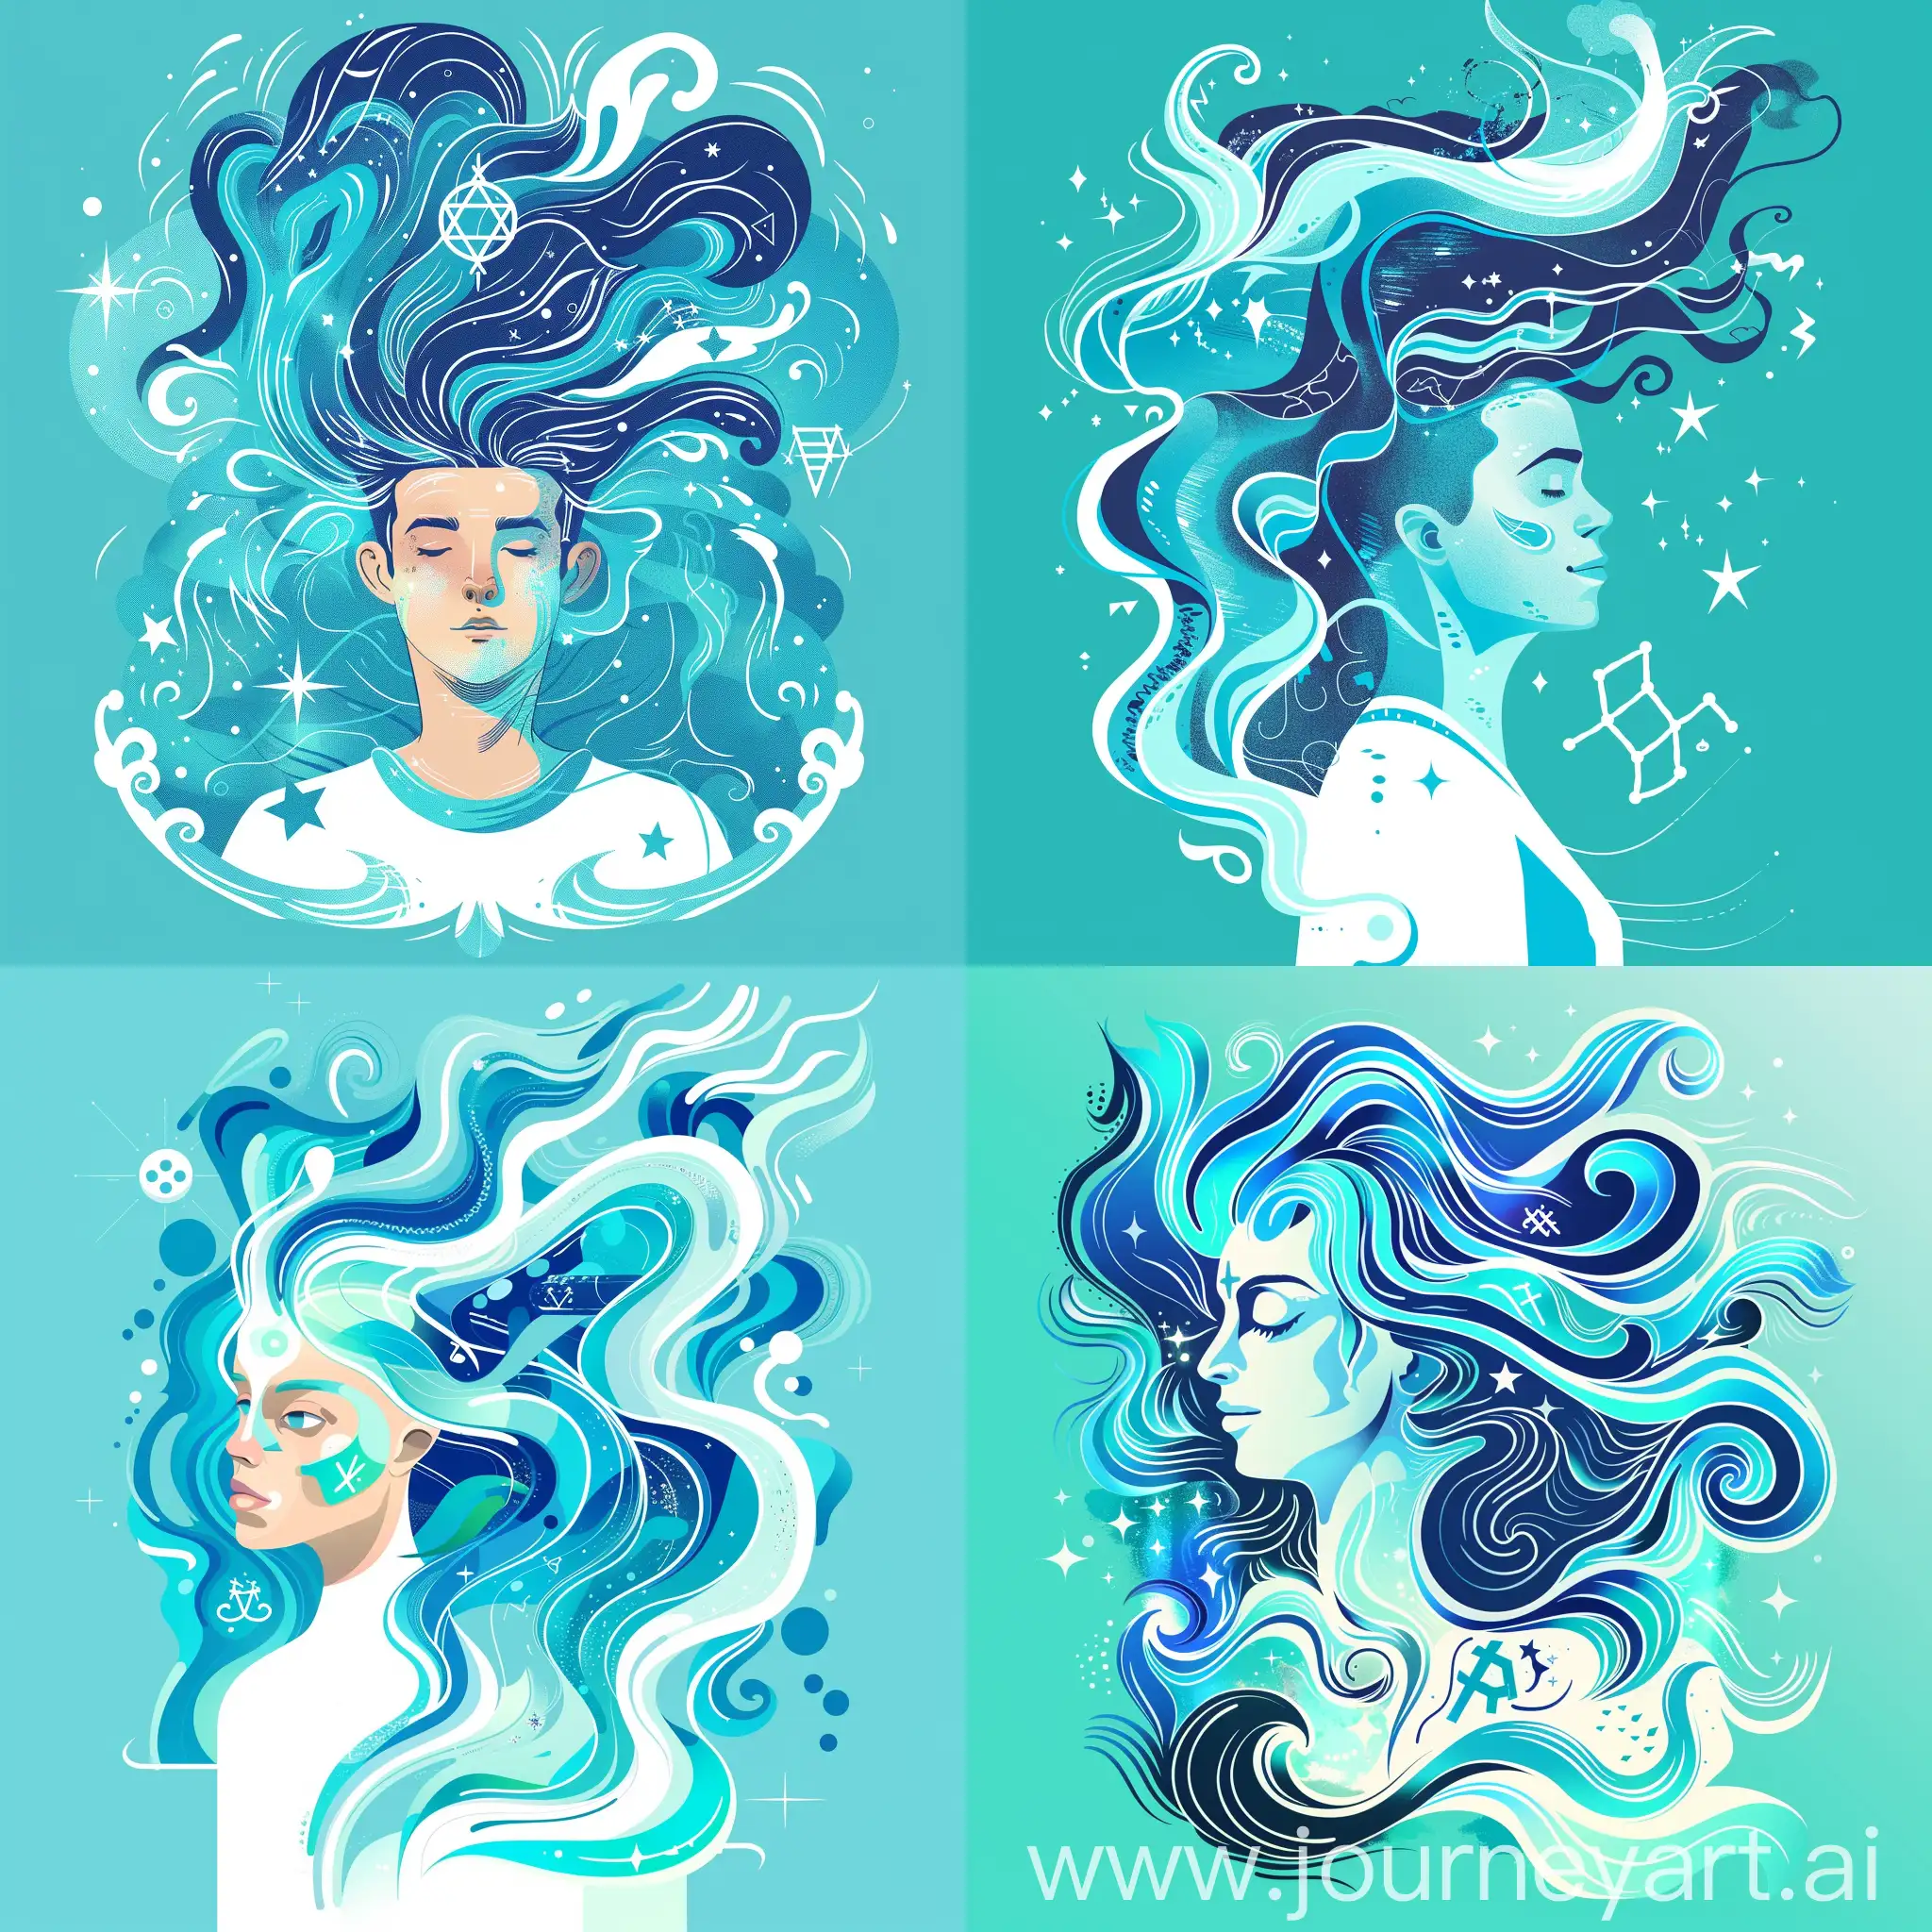 /imagine Create a vibrant and captivating artwork of Aquarius, the zodiac sign, designed for stickers. The central figure should be a serene and ethereal person, embodying the water-bearer, with flowing blue and turquoise hues blending seamlessly into their appearance. Their hair should resemble flowing water, with dynamic, fluid patterns swirling around their face and upper body.  Key elements:  A bright and cheerful color palette with blues, teals, and white, highlighting the fluidity and tranquility of water. A serene and mystical expression on the person’s face, exuding calmness and creativity. Incorporate subtle stars or the Aquarius symbol (♒︎) into the background, adding a celestial touch without cluttering the design. The background should be simple yet complement the water theme, using gradients of blue and hints of teal to evoke an oceanic or cosmic atmosphere. Ensure the design is clean, bold, and eye-catching, suitable for sticker production.